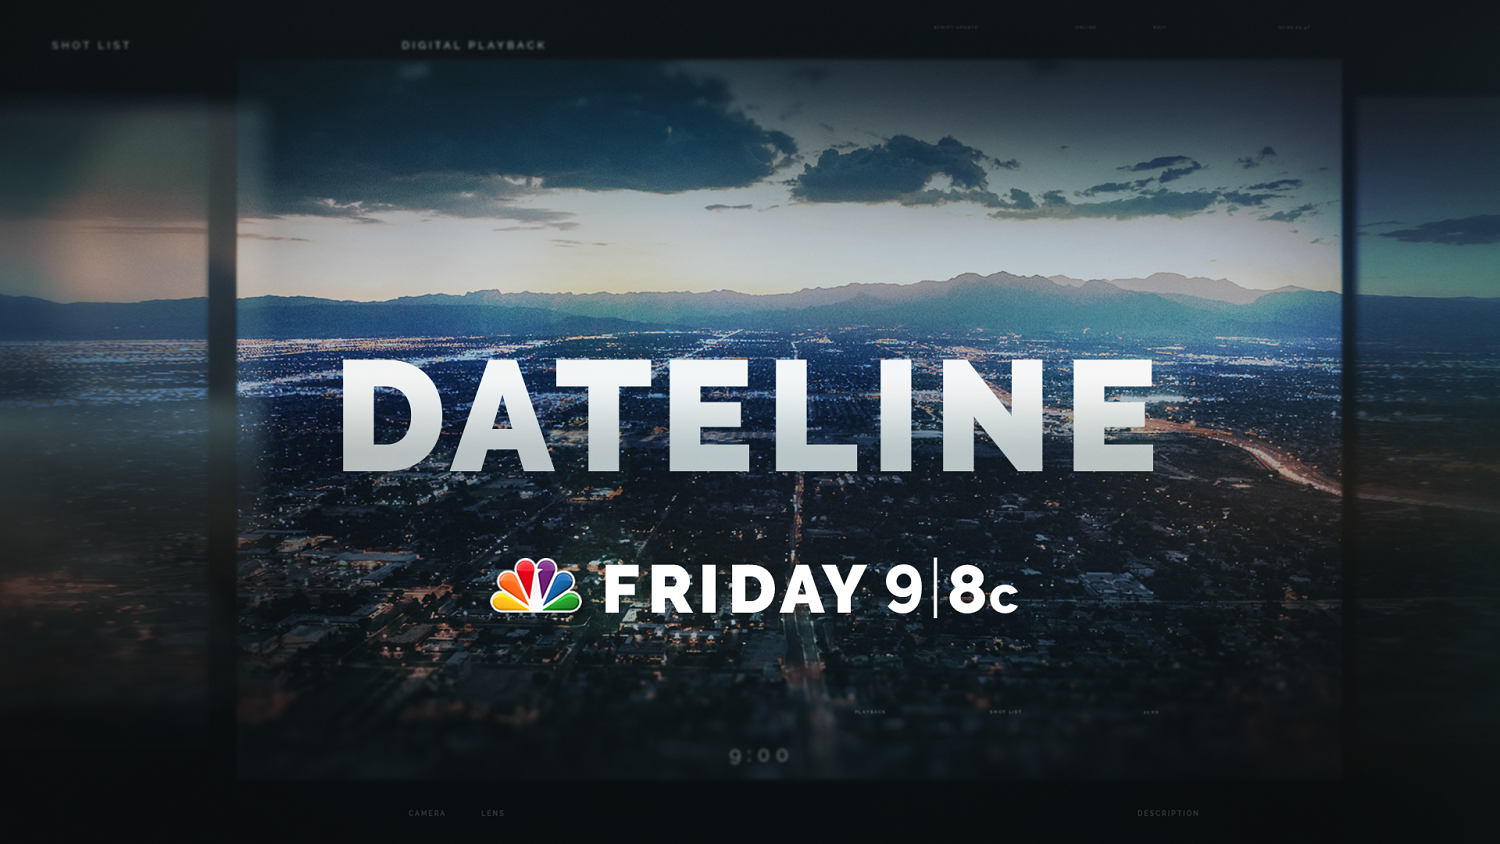 DATELINE FRIDAY PREVIEW: Sound and Fury